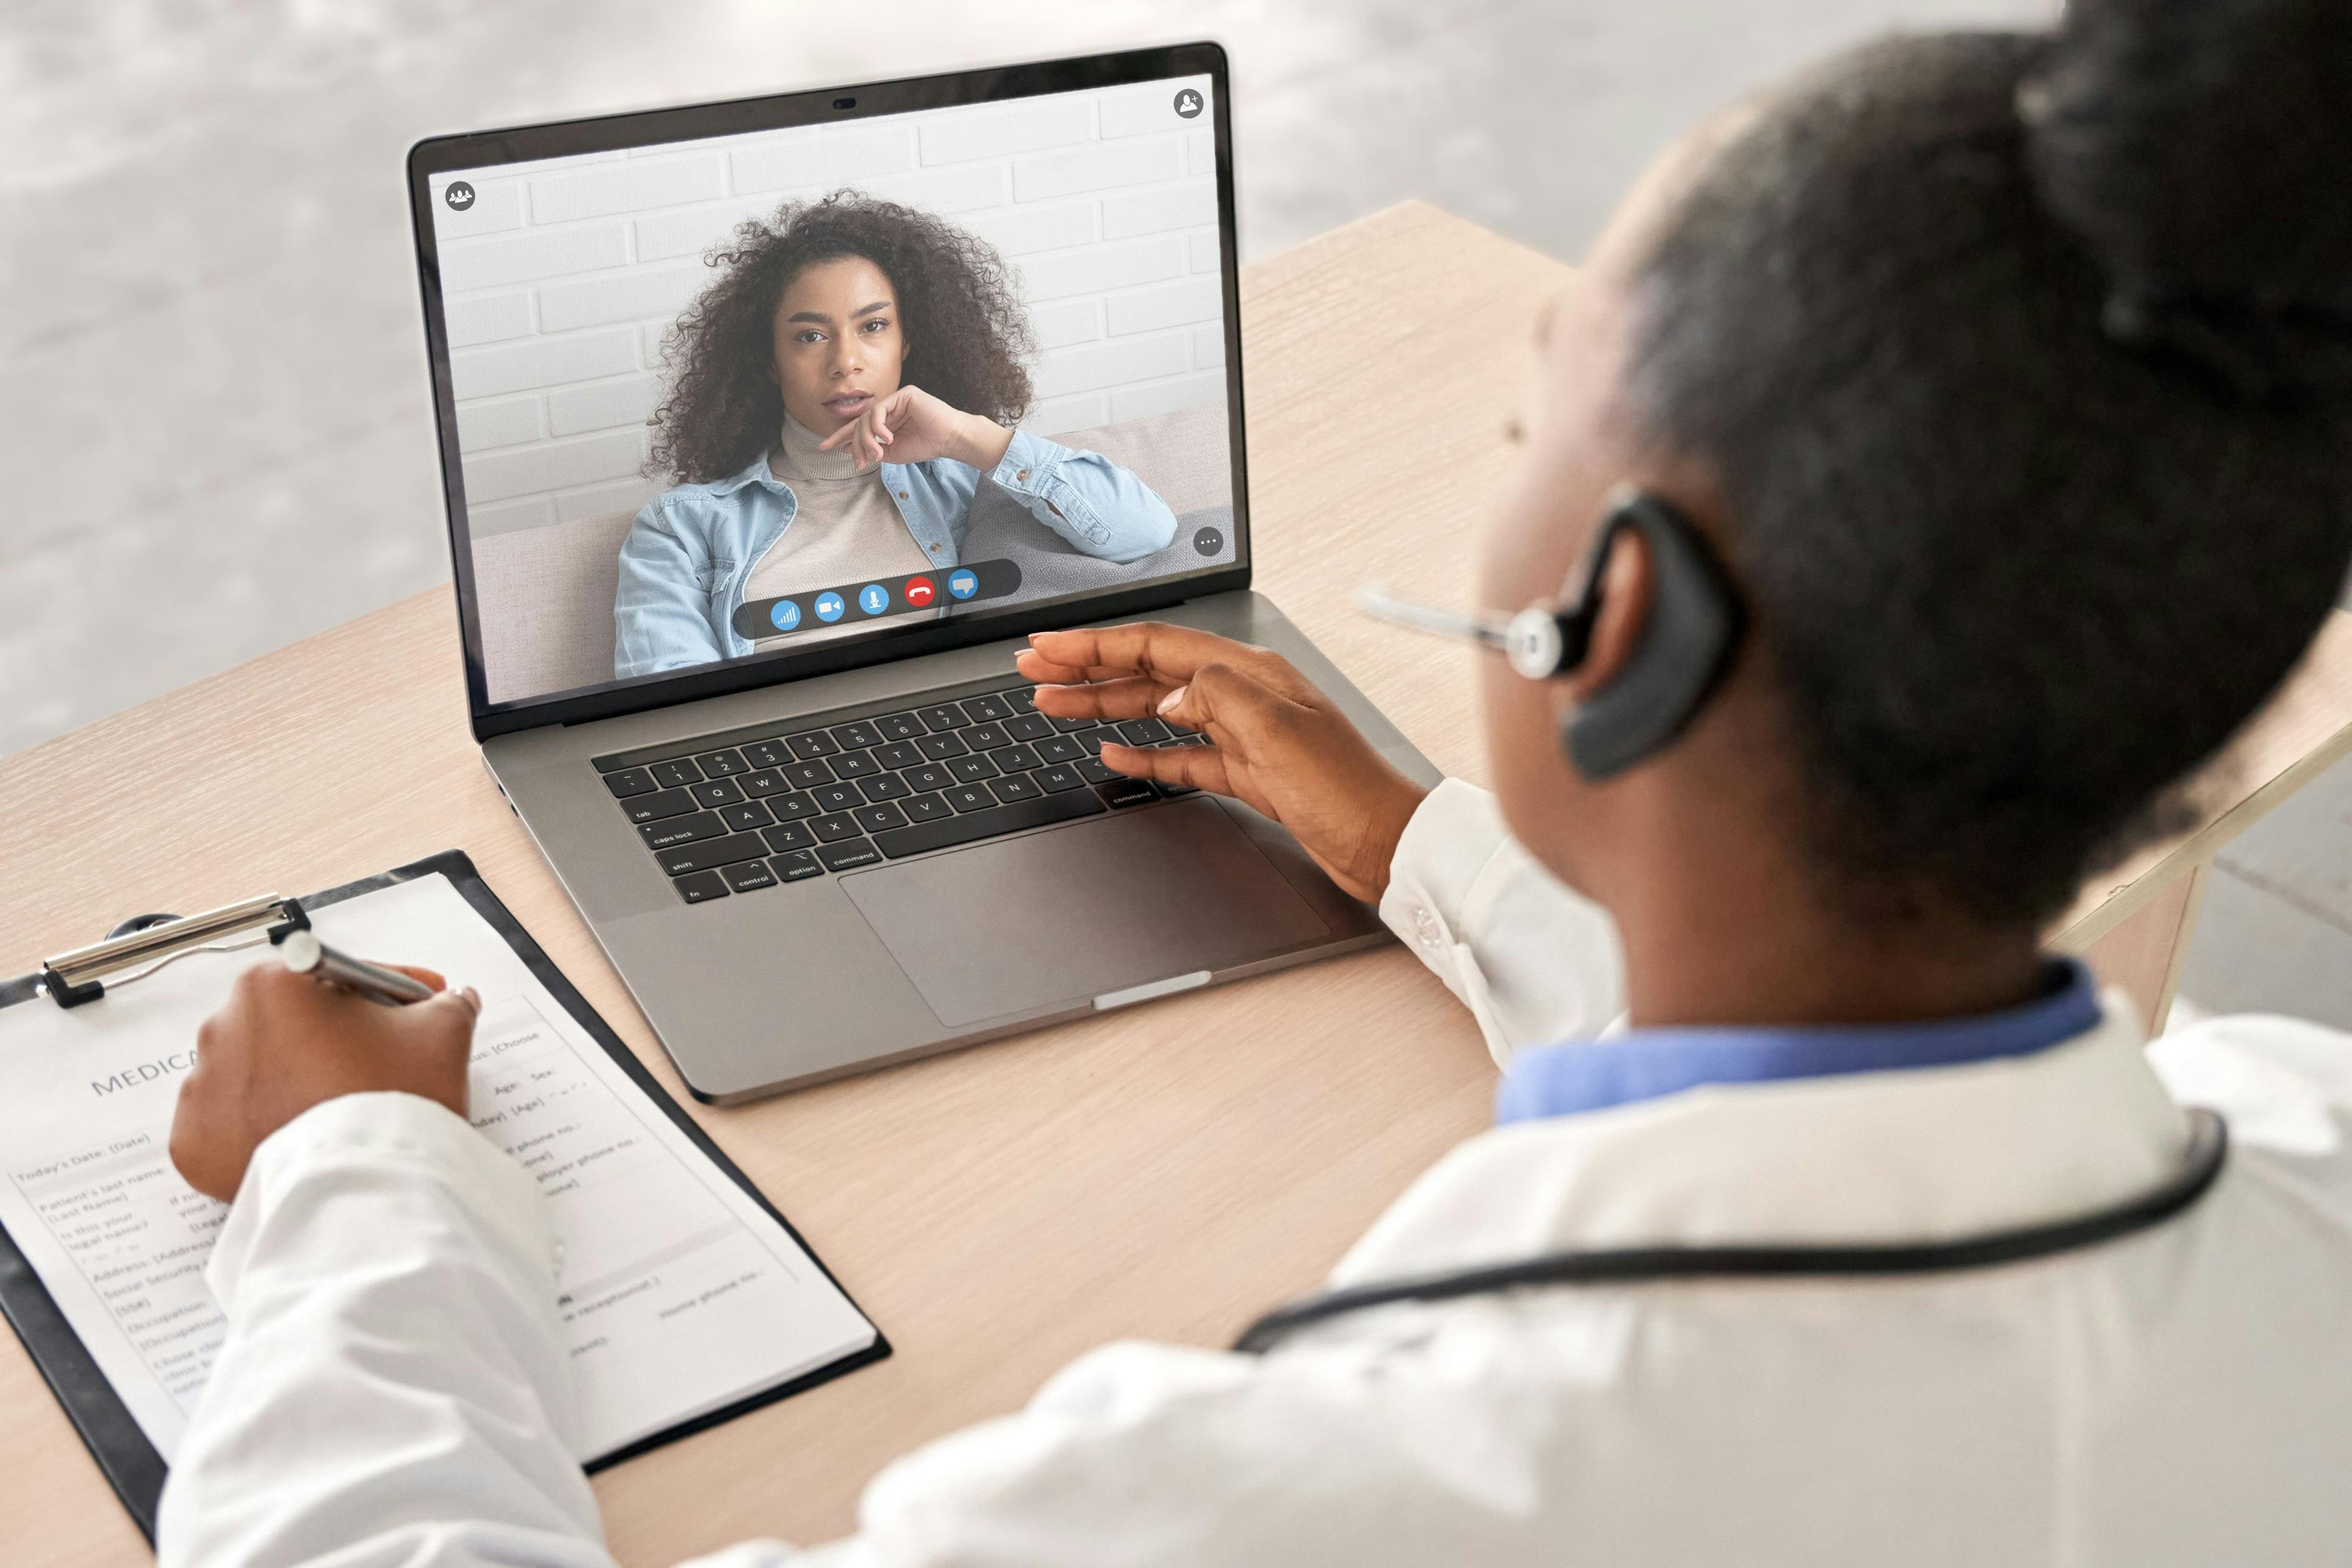 Using telemedicine for contraceptive counseling